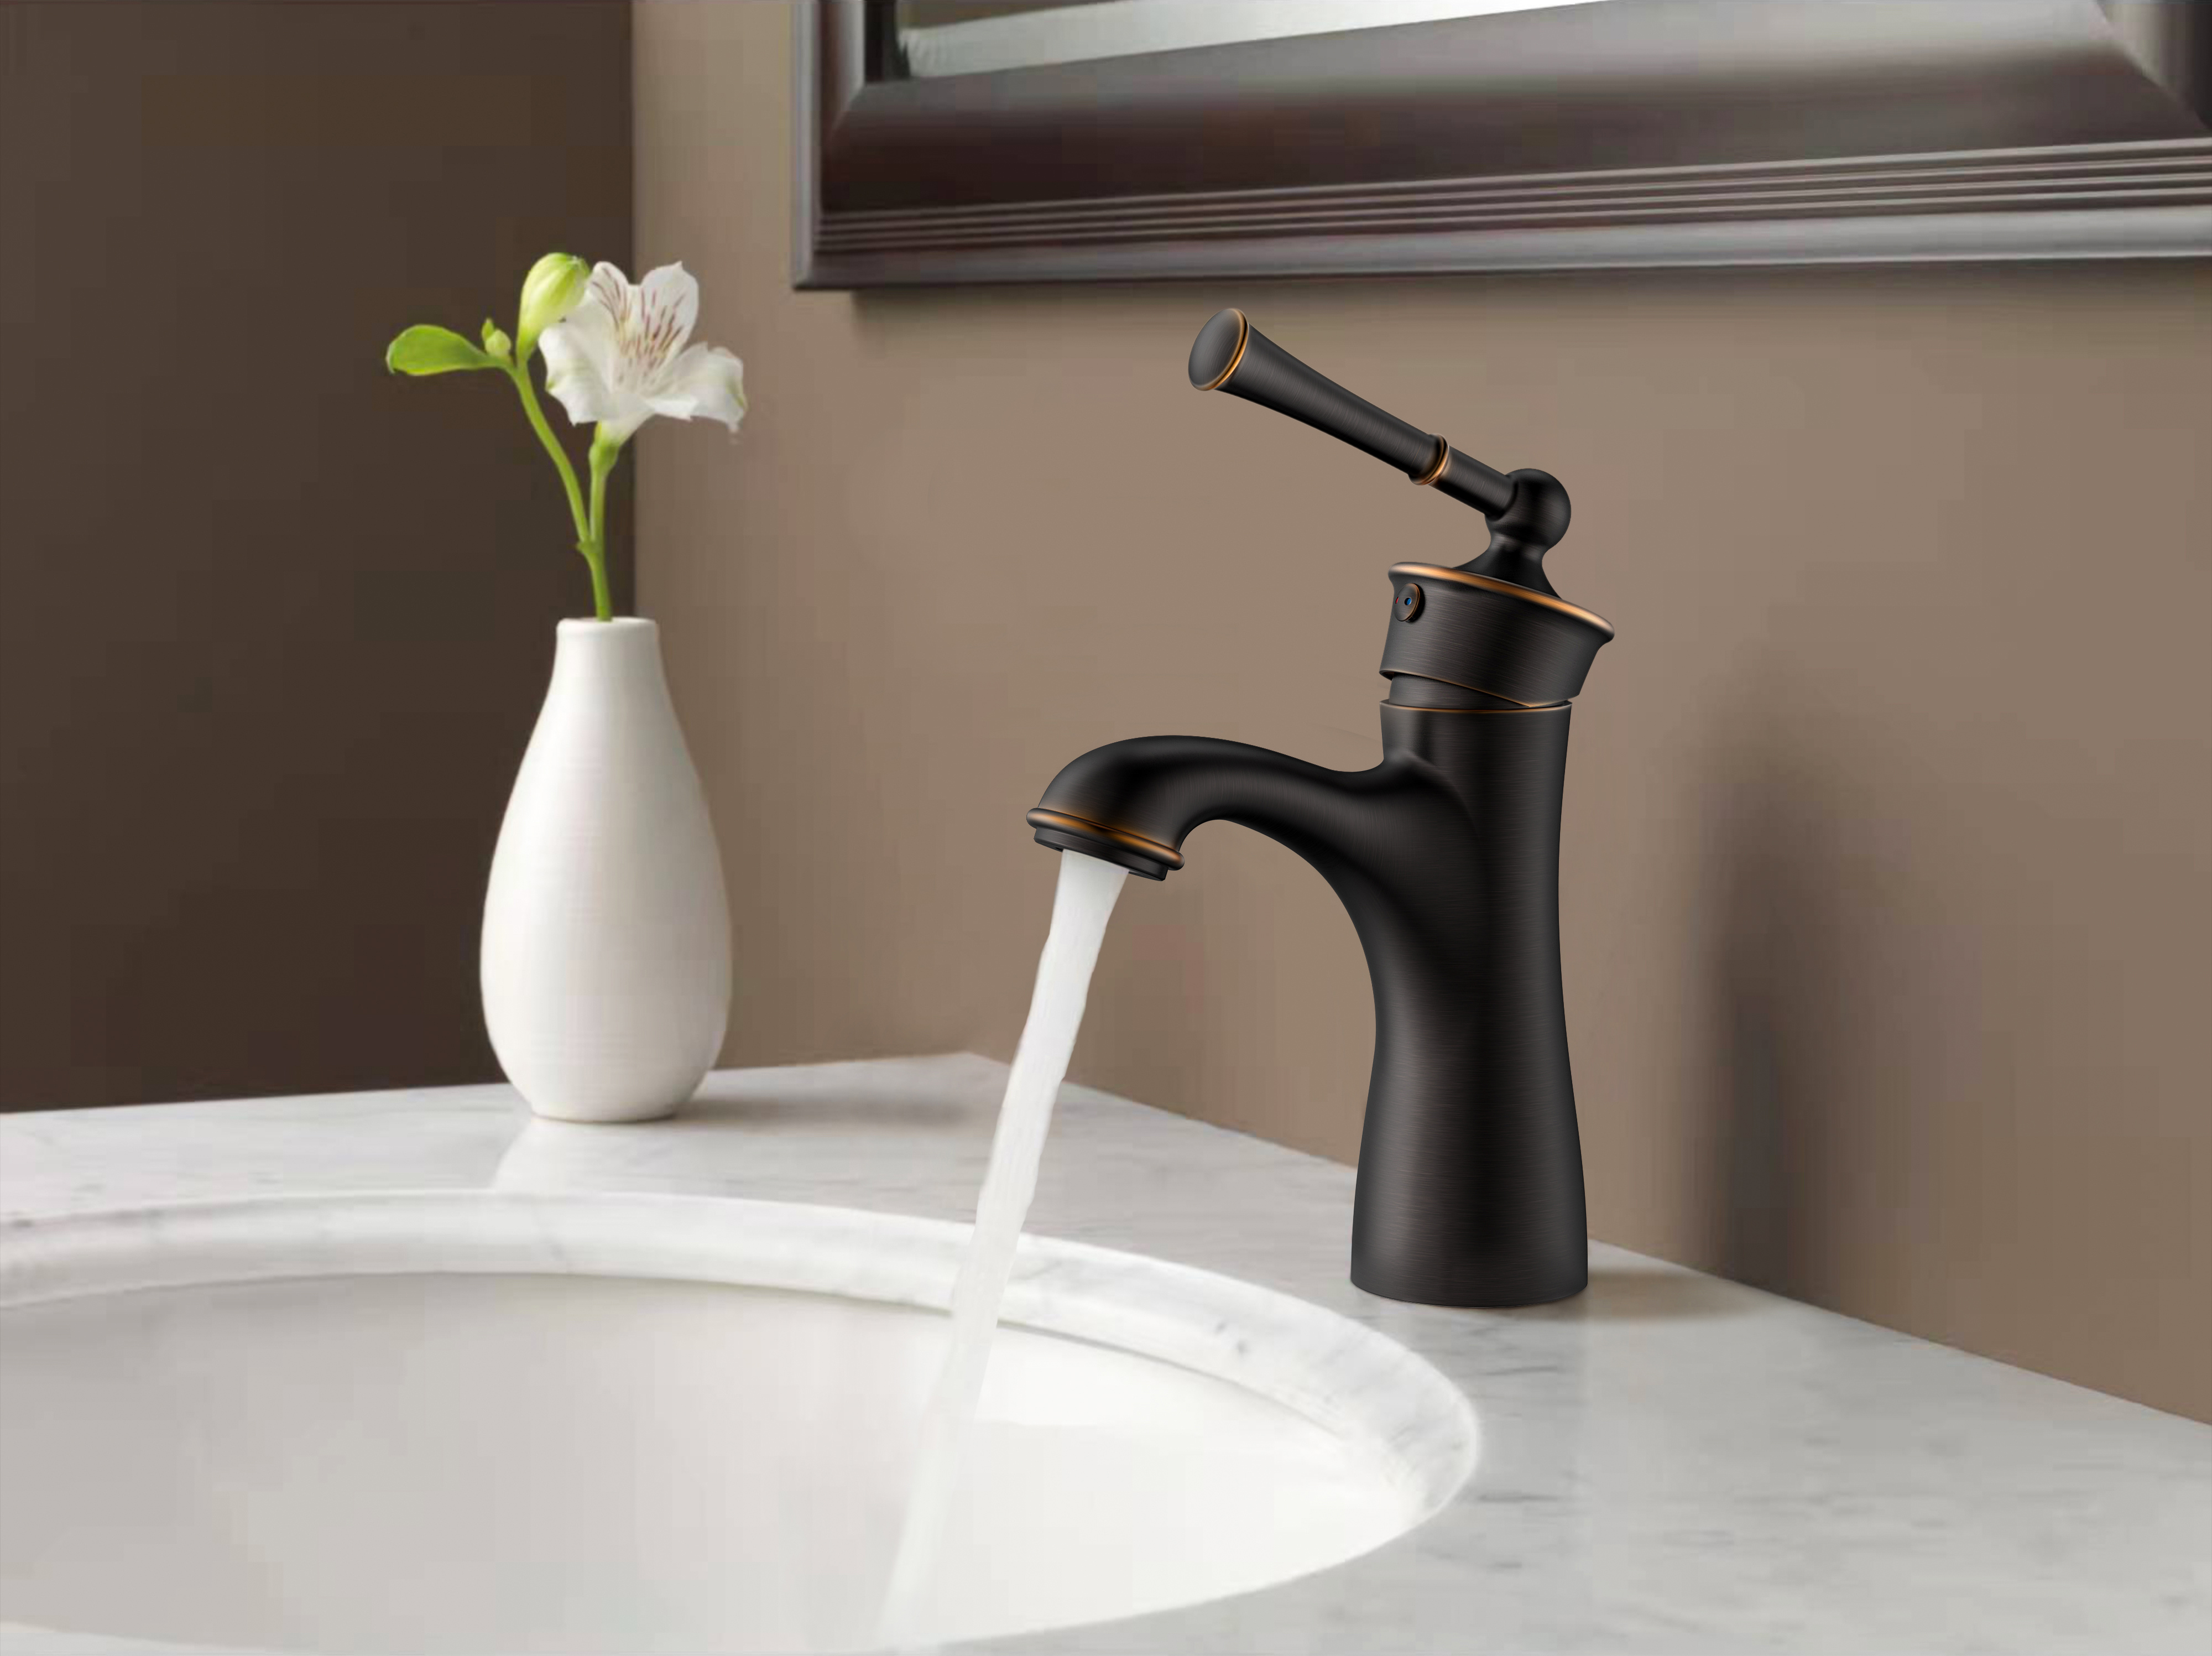 How to Choose and Clean a Gold/Black Bathroom Faucet